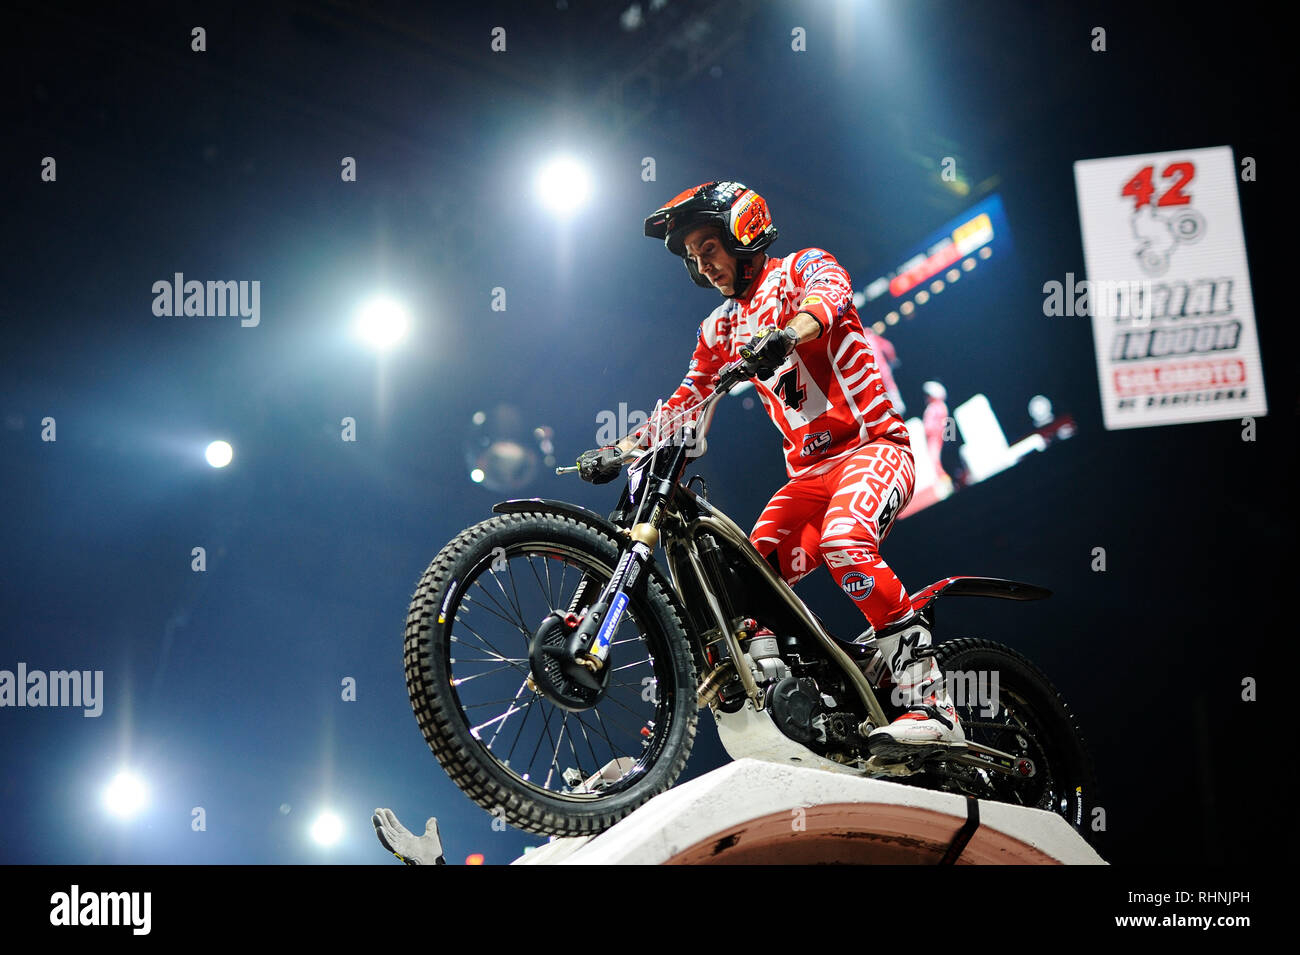 Barcelona, Spain 3rd February, 2019. Jeroni Fajardo of the Gas Gas Team in action during the Barcelona Solo Moto Trial indoor at the Palau Sant Jordi. Credit: Pablo Guillen/Alamy Live News Stock Photo